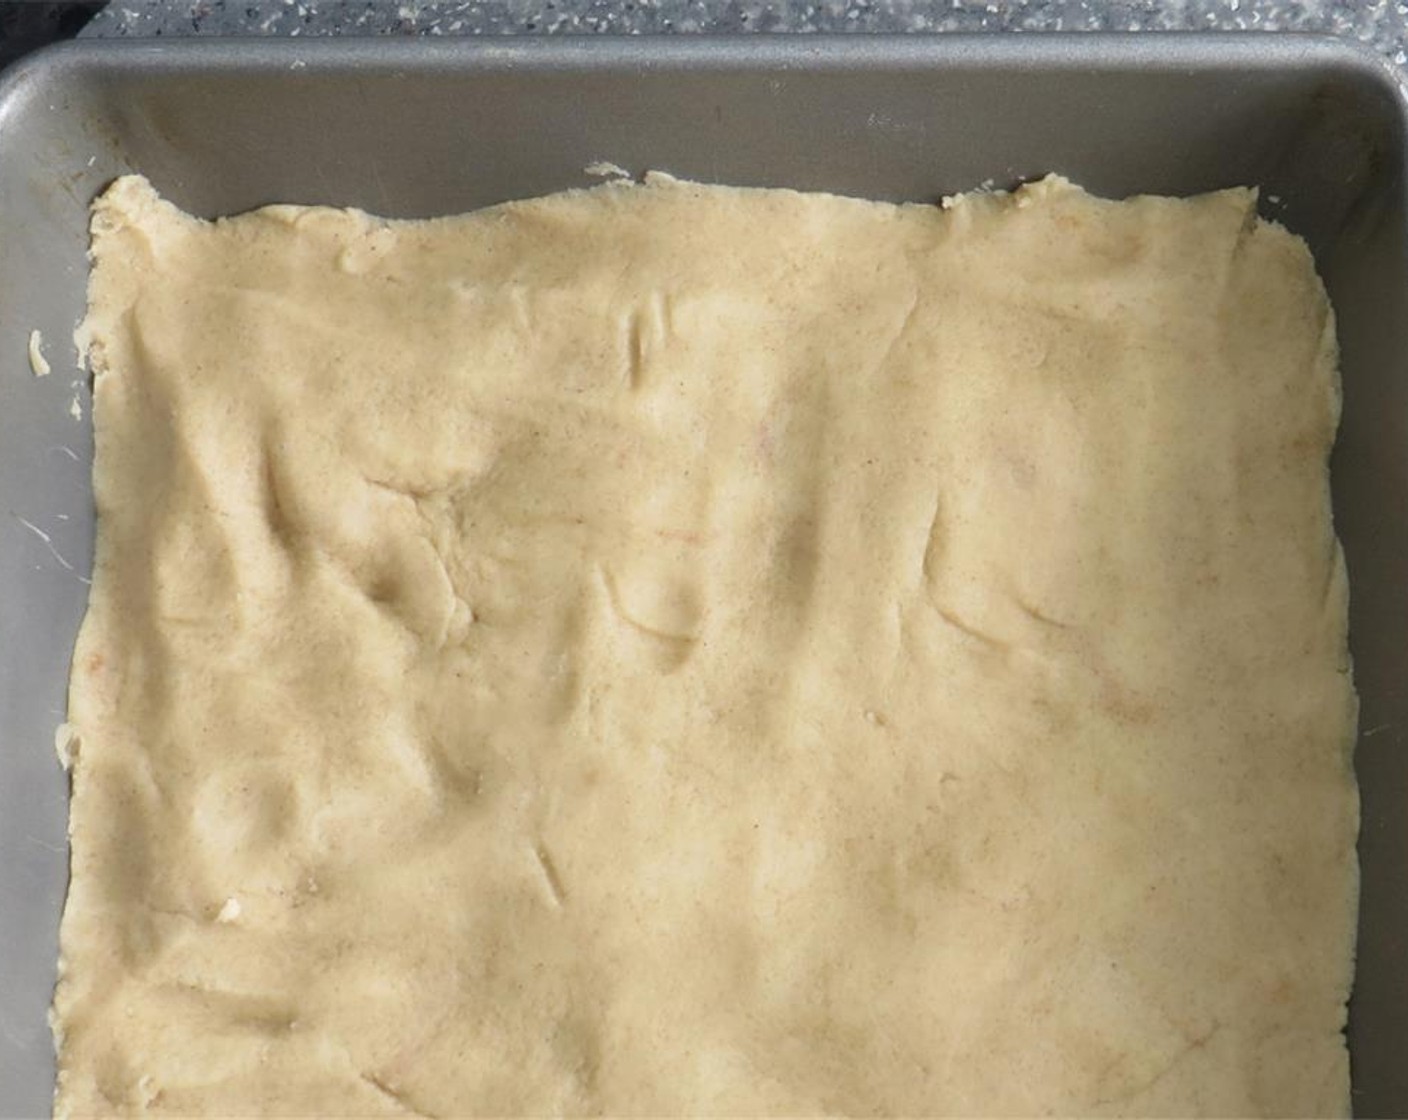 step 5 Press dough into bottom of a prepared baking dish. Bake until crust is pale golden, 25 to 30 minutes. Let cool.